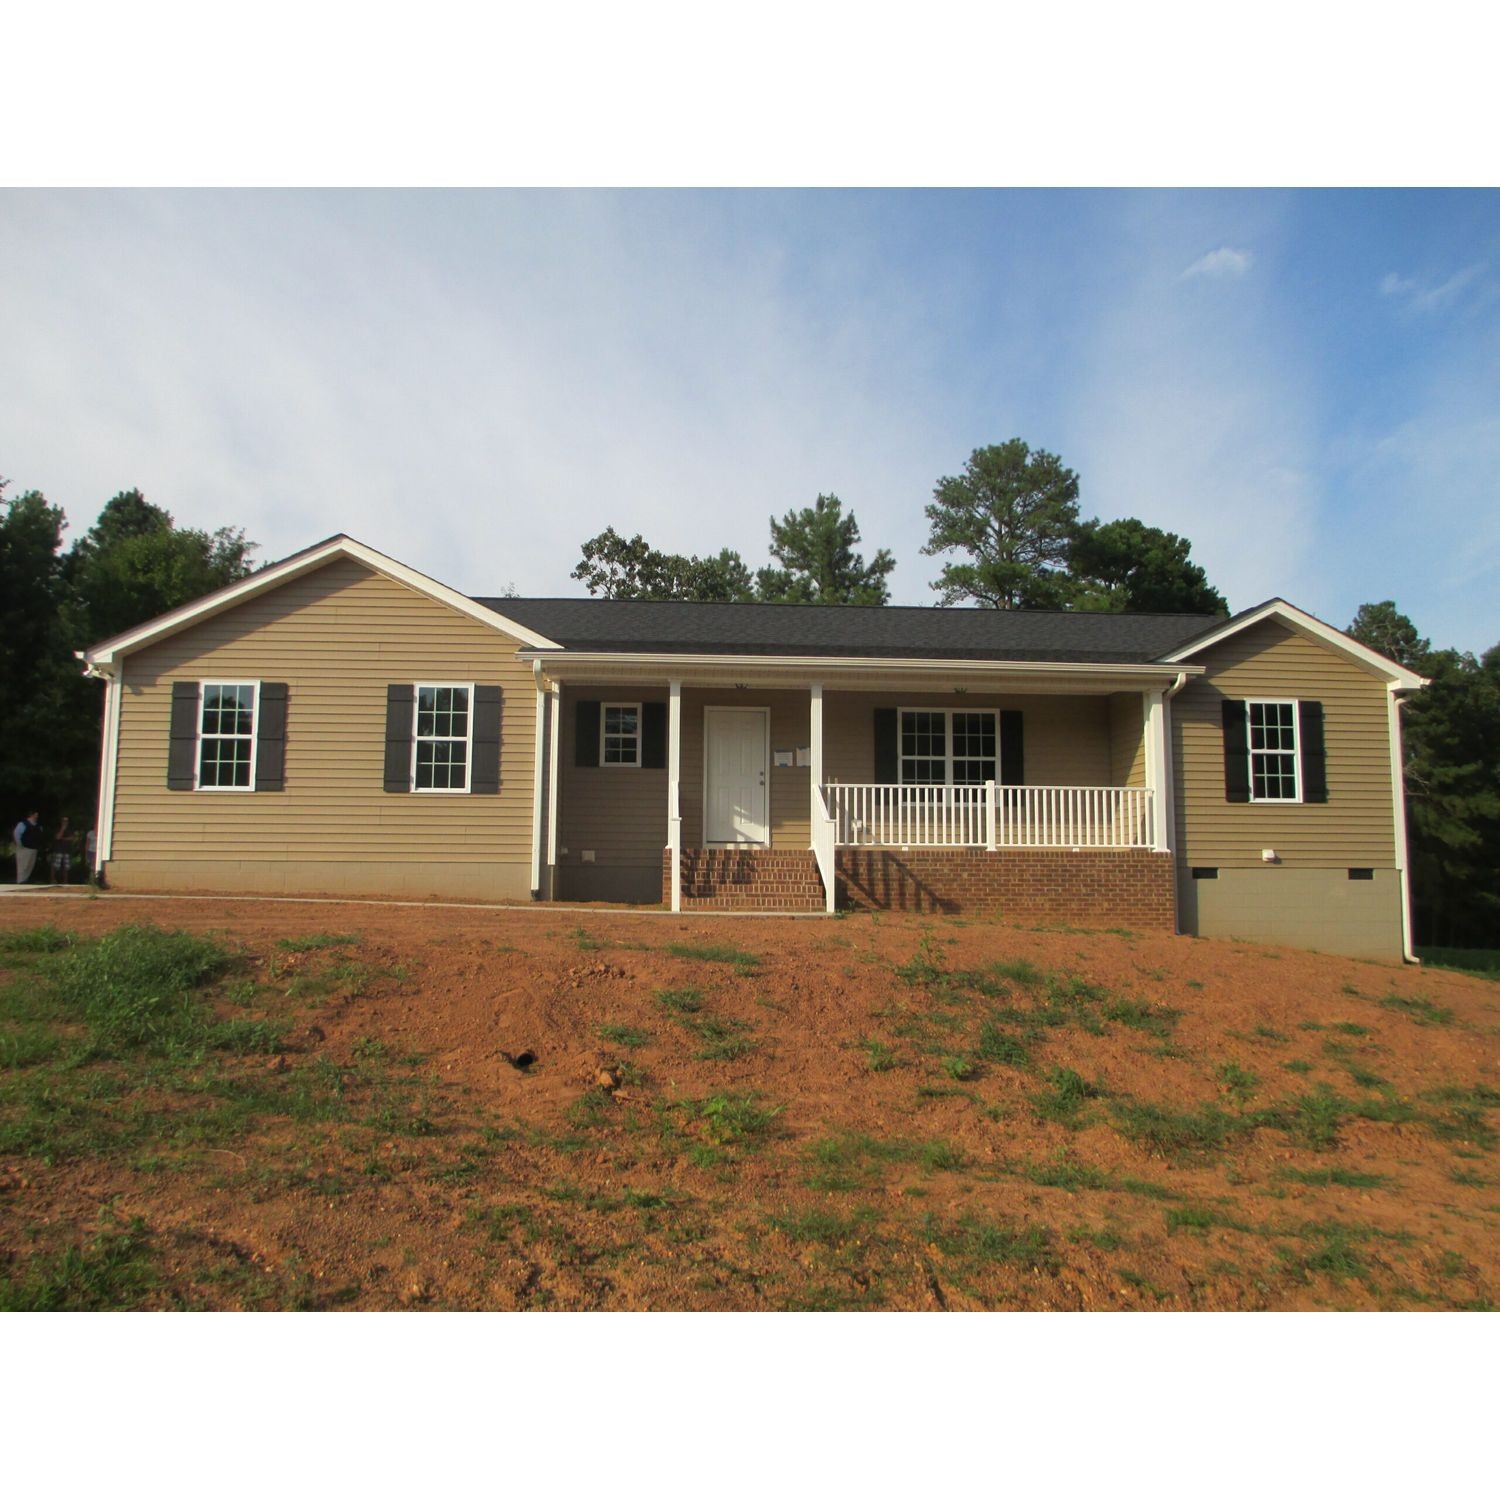 9. Valuebuild Homes - Rocky Mount - Build On Your Lot